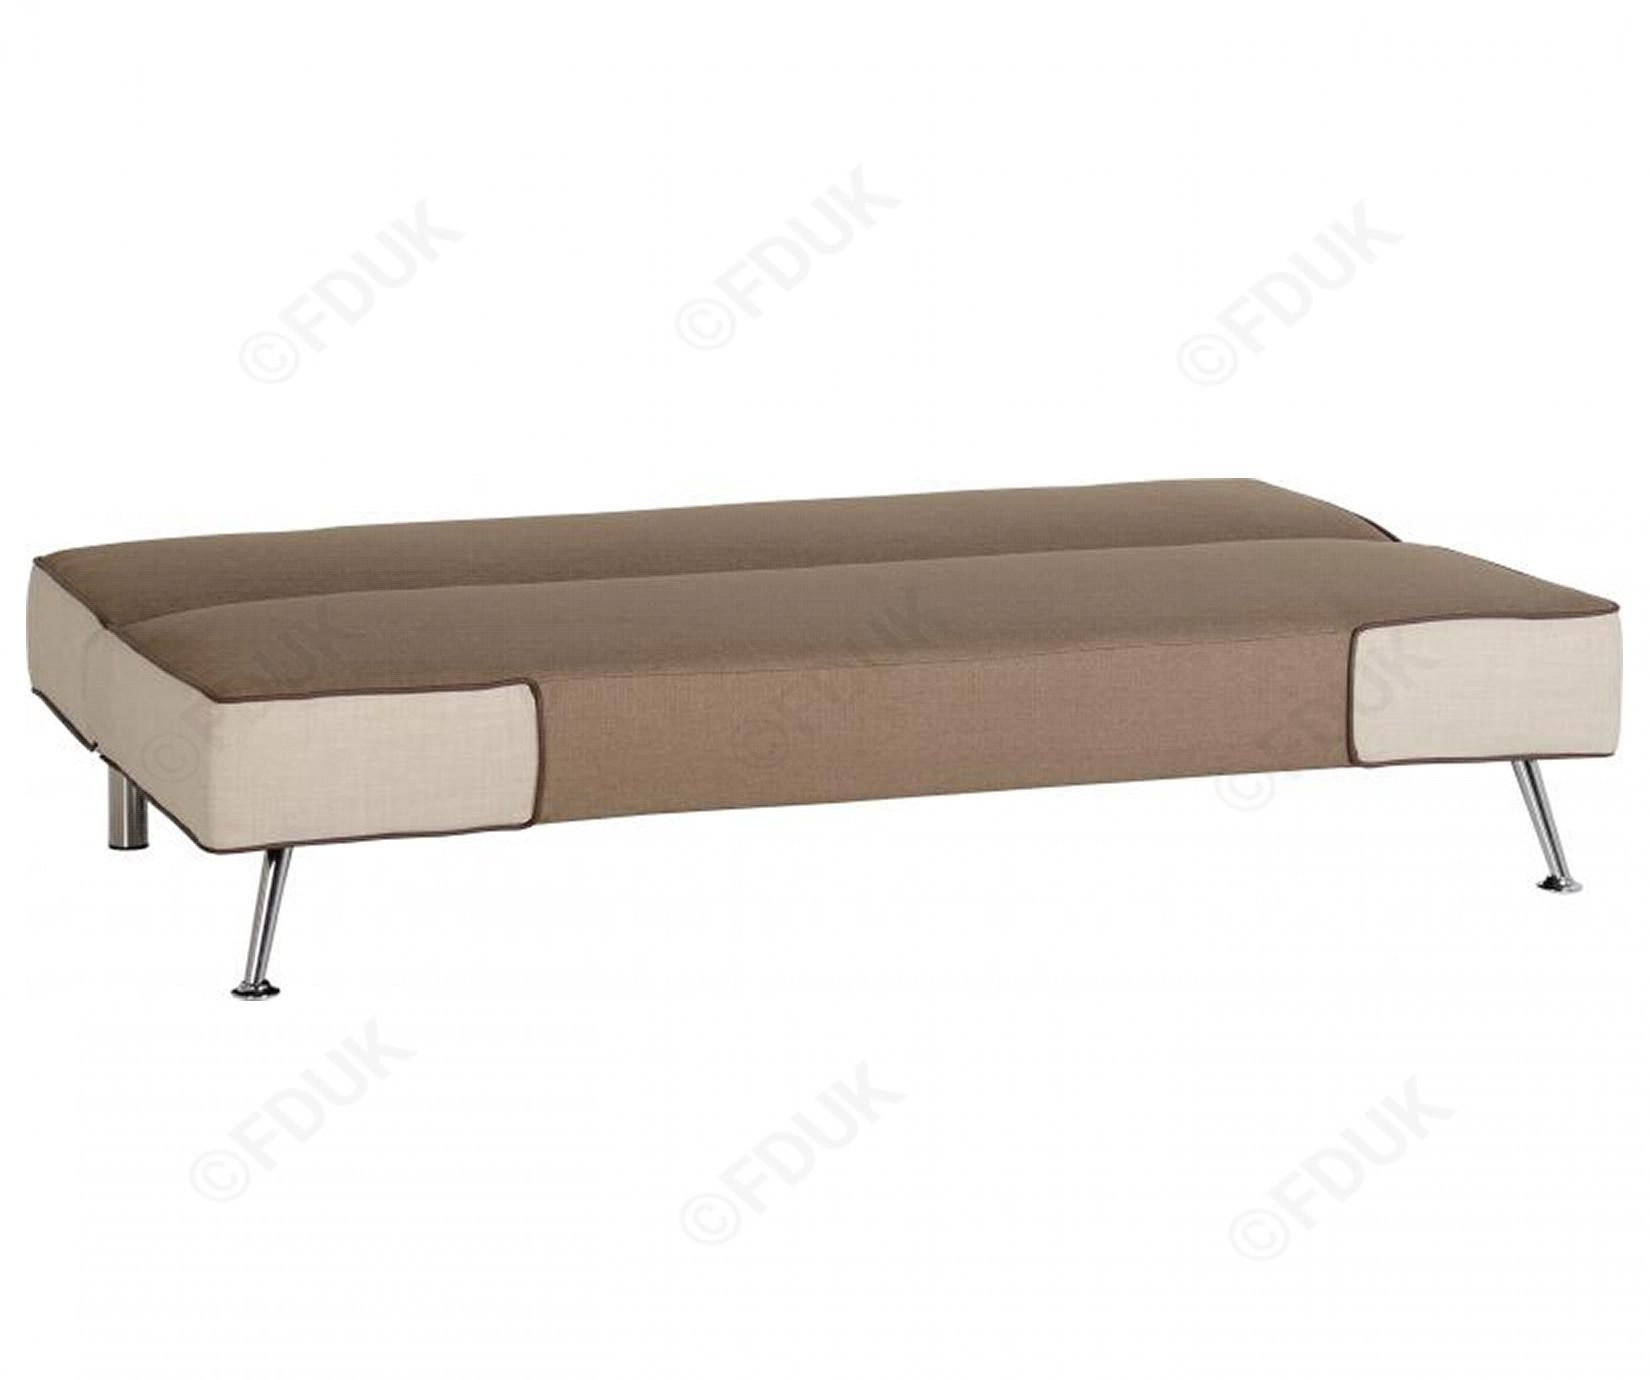 Seconique | Florence Brown And Cream Fabric Sofa Bed Pertaining To Florence Sofa Beds (View 8 of 20)